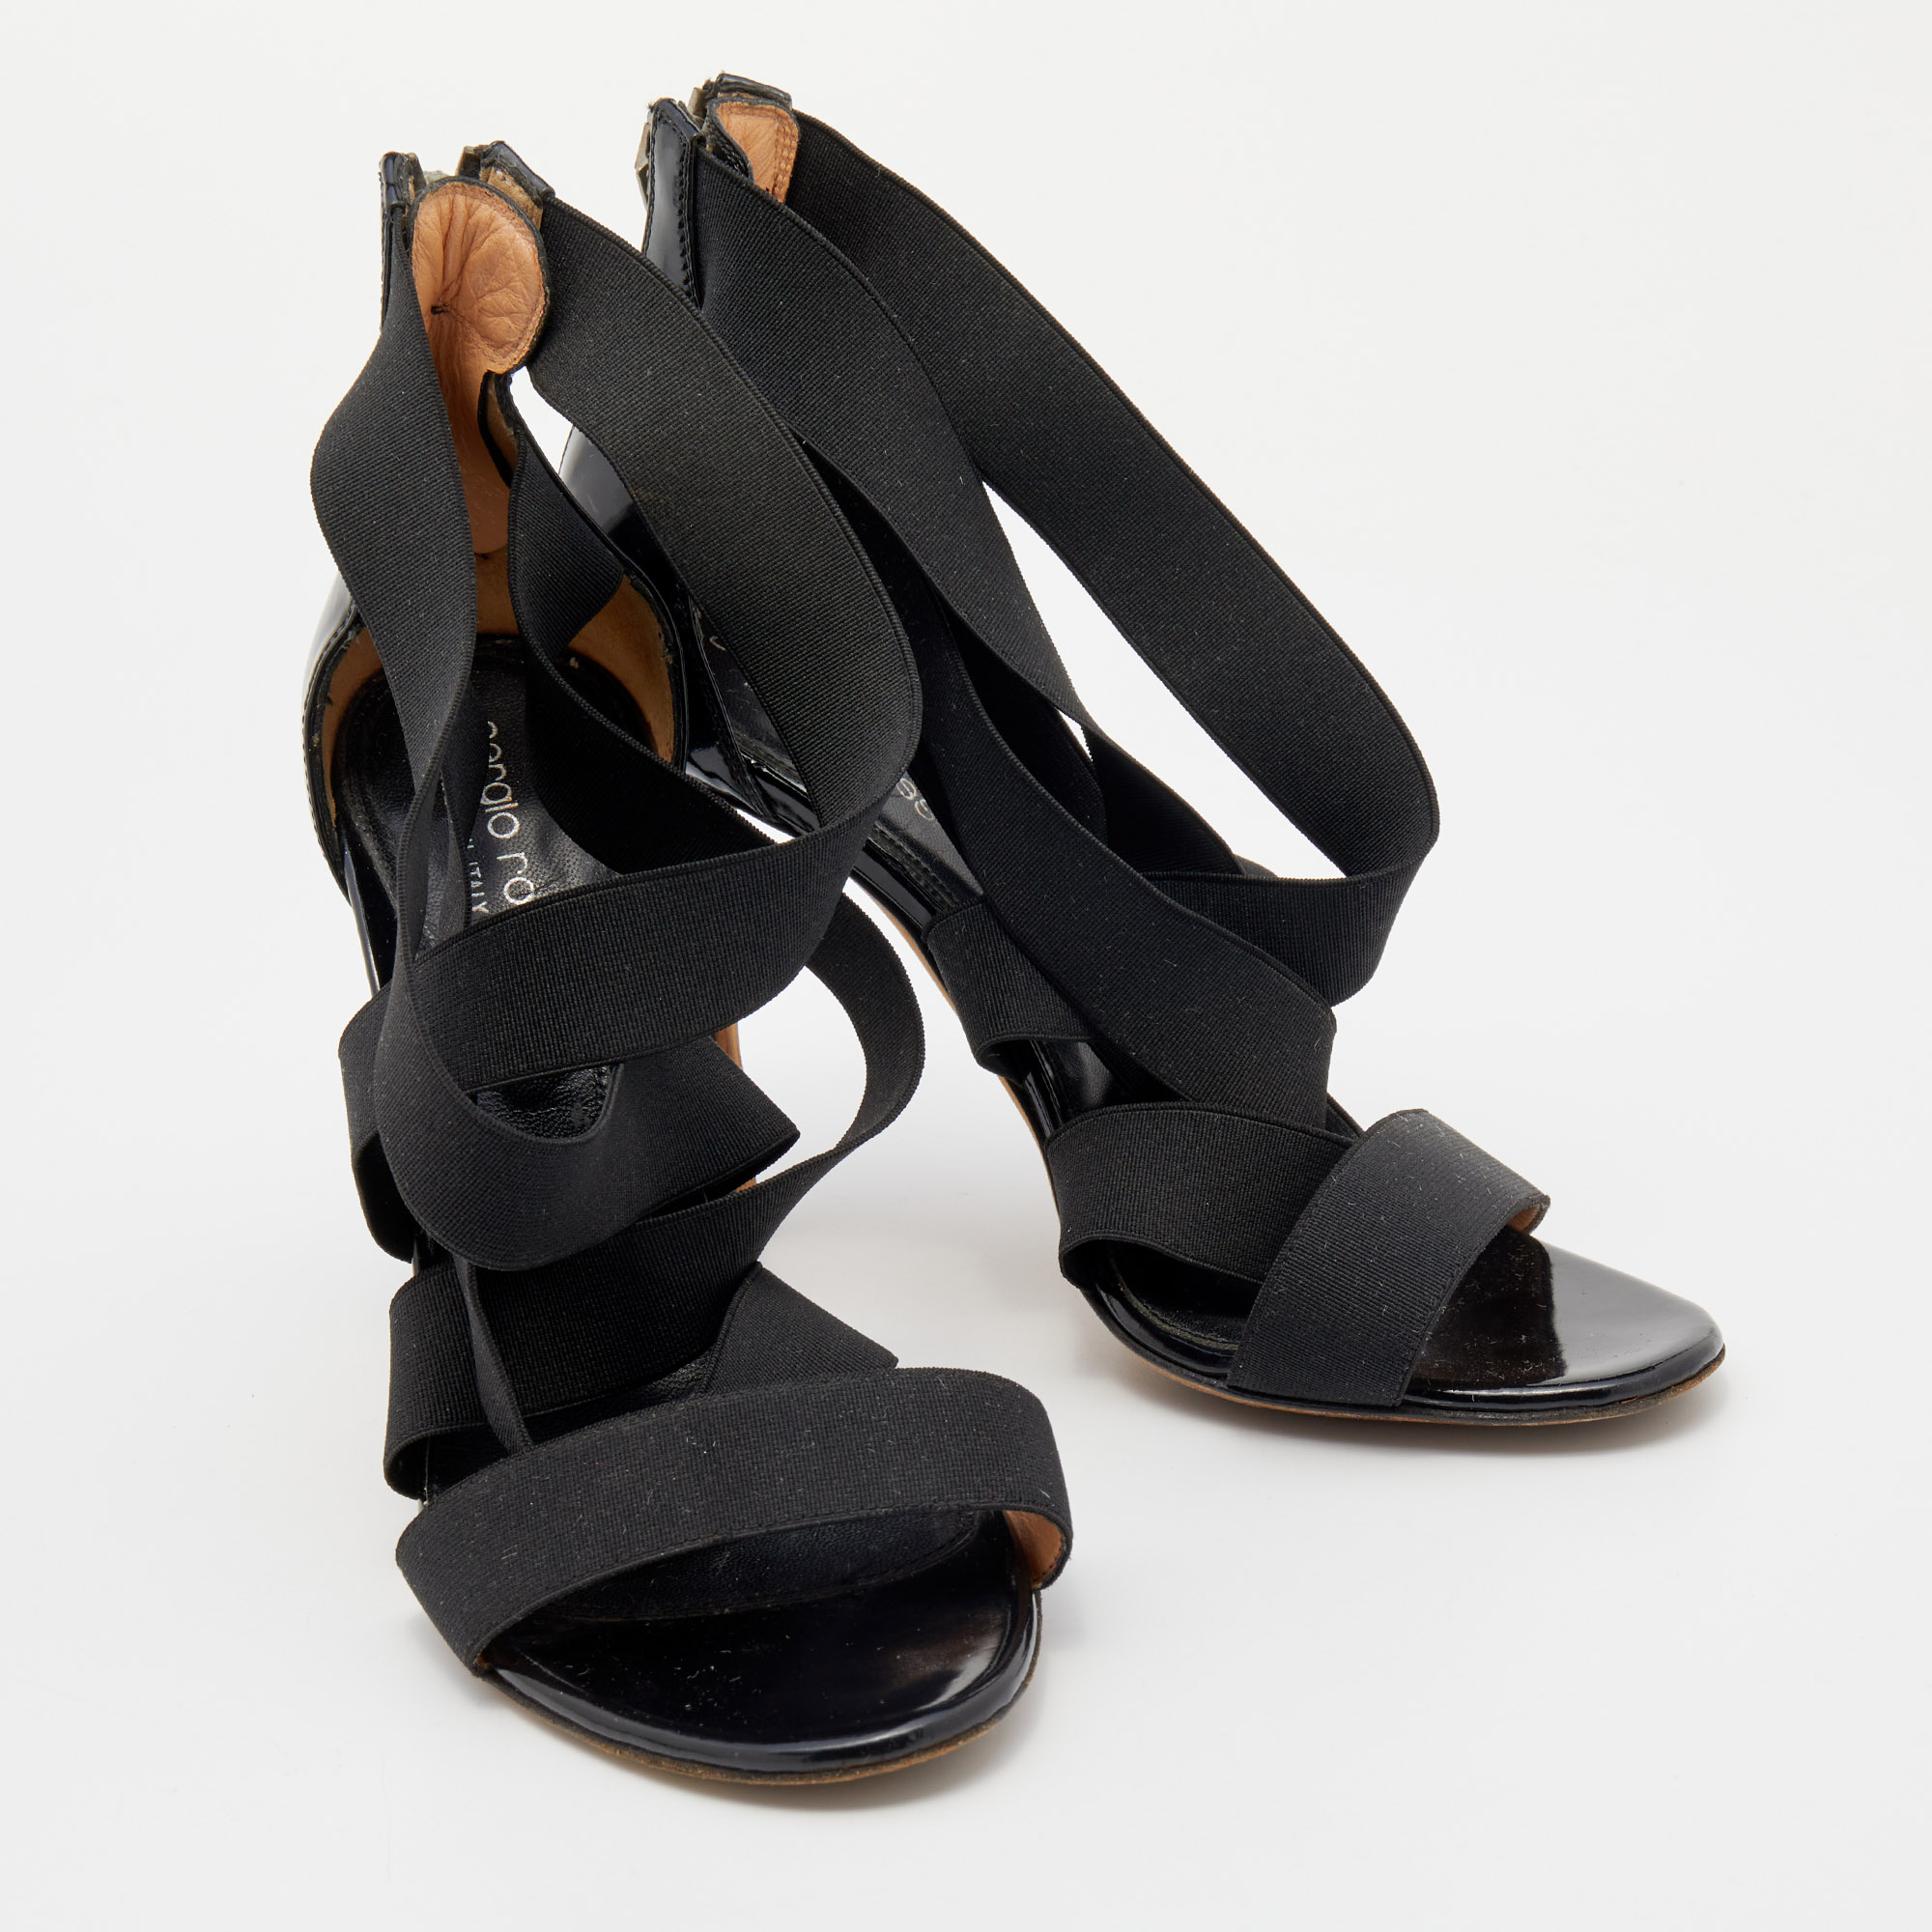 Sergio Rossi Black Patent Leather And Elastic Strappy Sandals Size 36